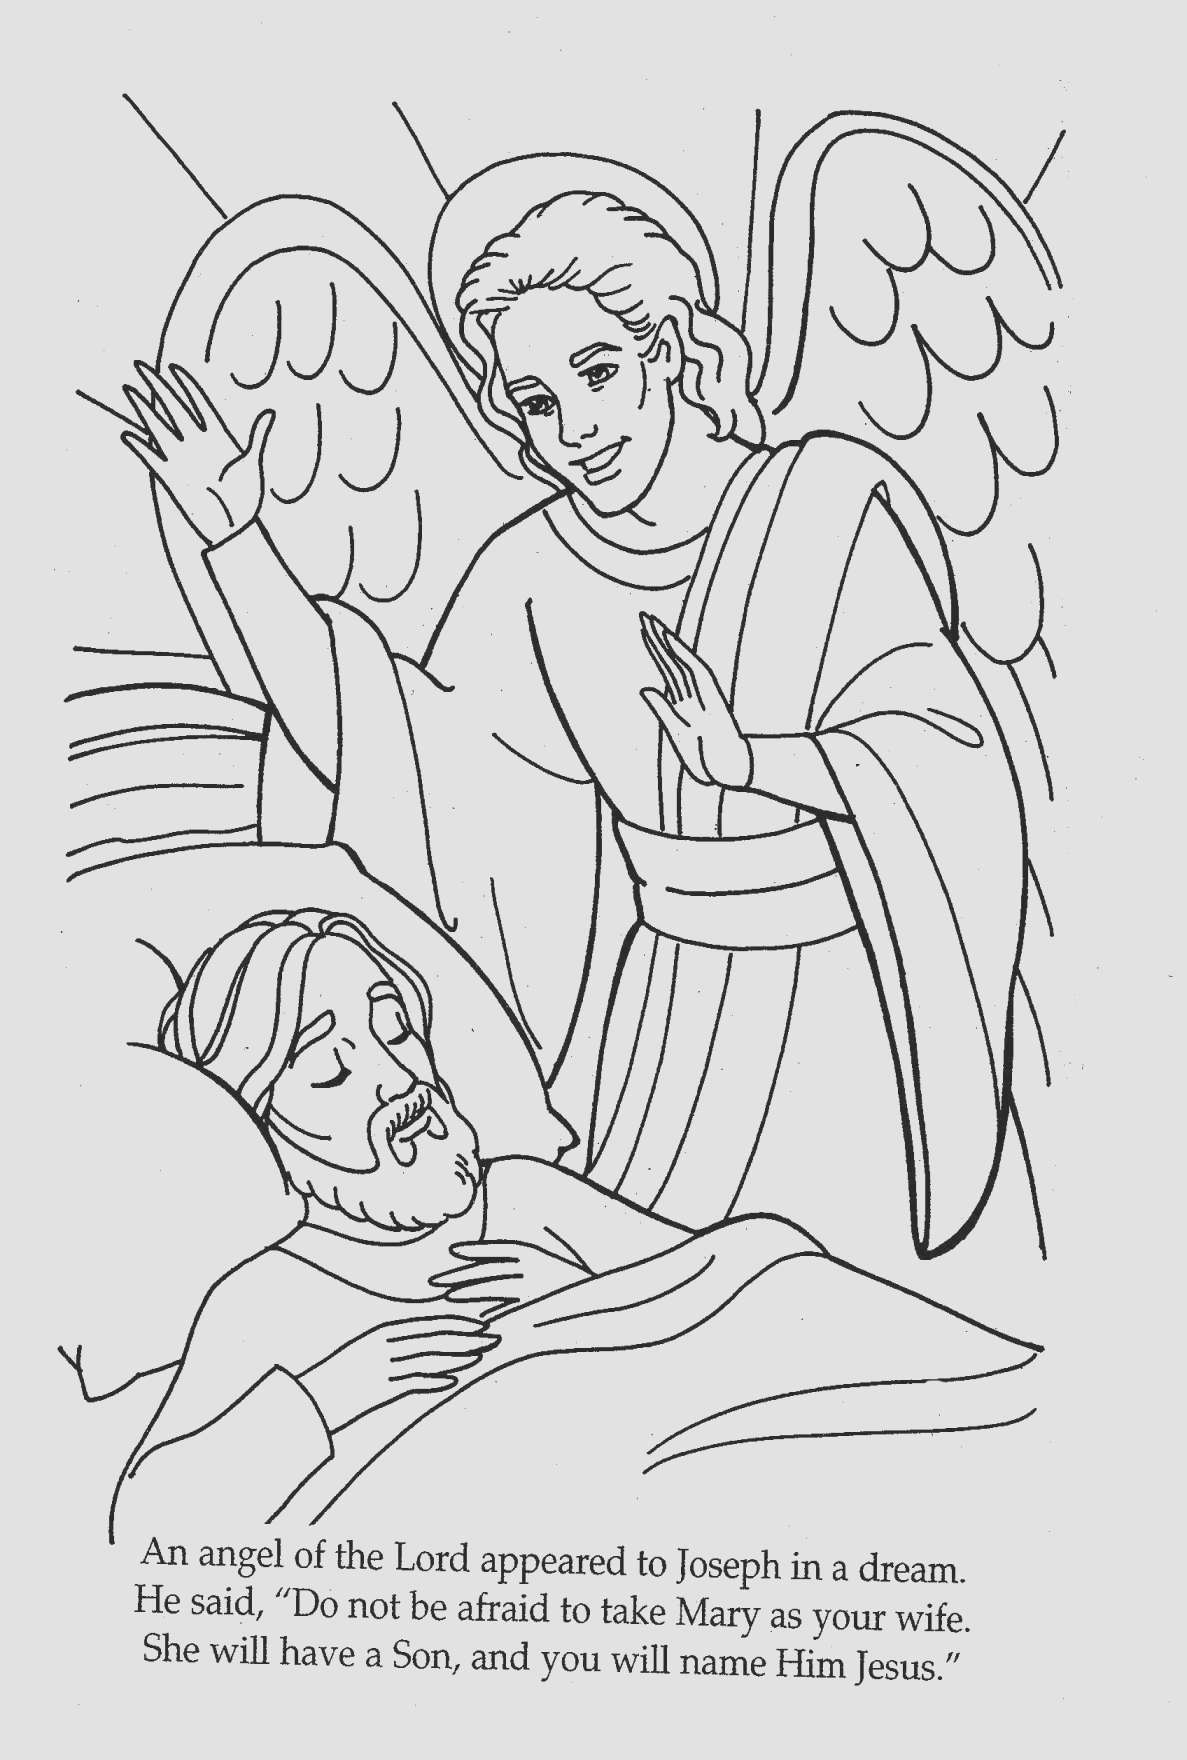 Names Of Jesus Coloring Page Joseph Forgives His Brothers Coloring Page Image Result For Joseph S